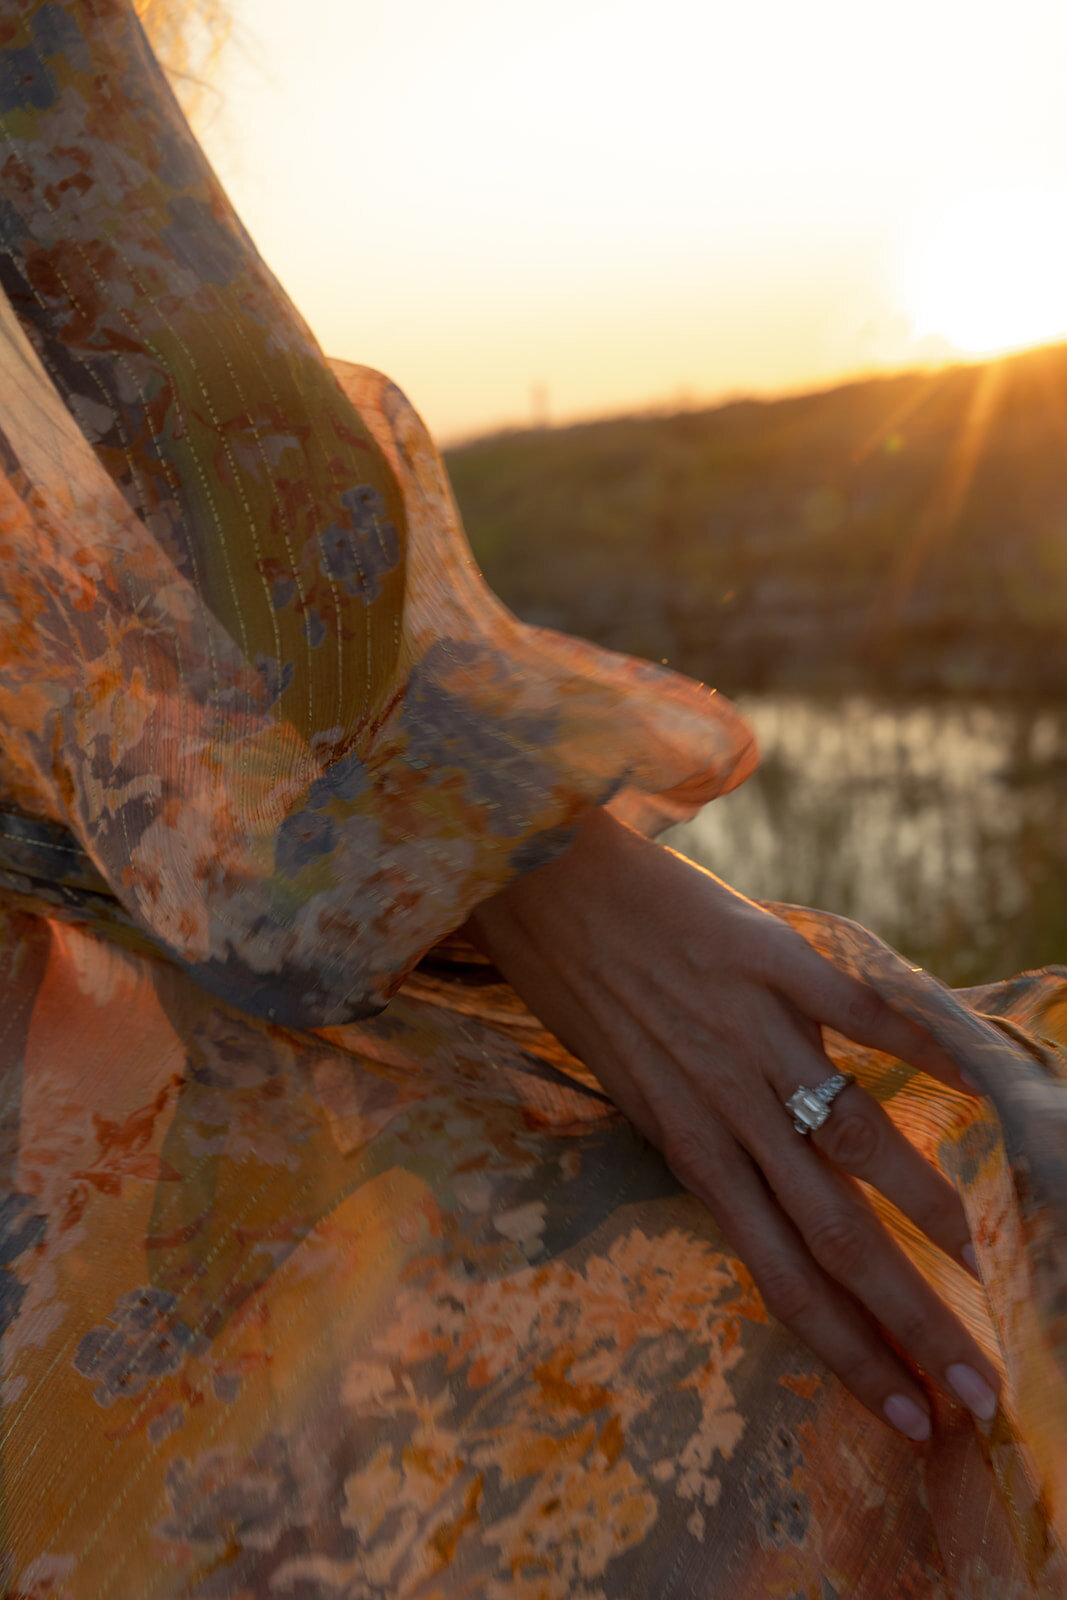 Woman's hand with engagement ring is holding on to orange dress with flower patterns. Sun is setting in the background and provides warm color. Engagement photo taken in Charleston.